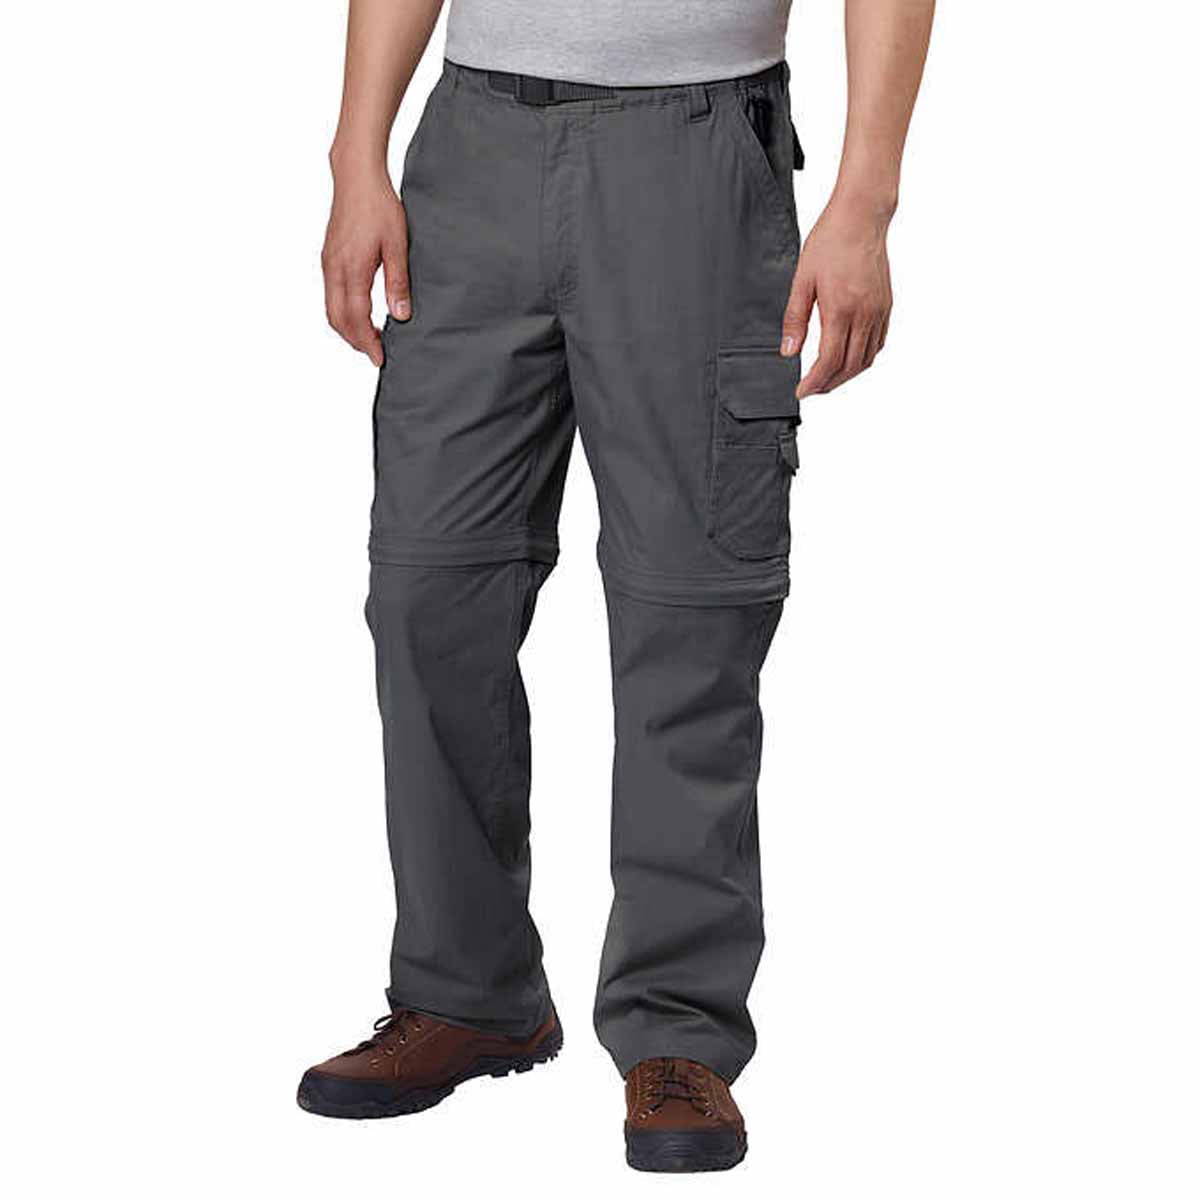 NEW BC Clothing Men's Convertible Stretch Cargo Pants Charcoal Grey 